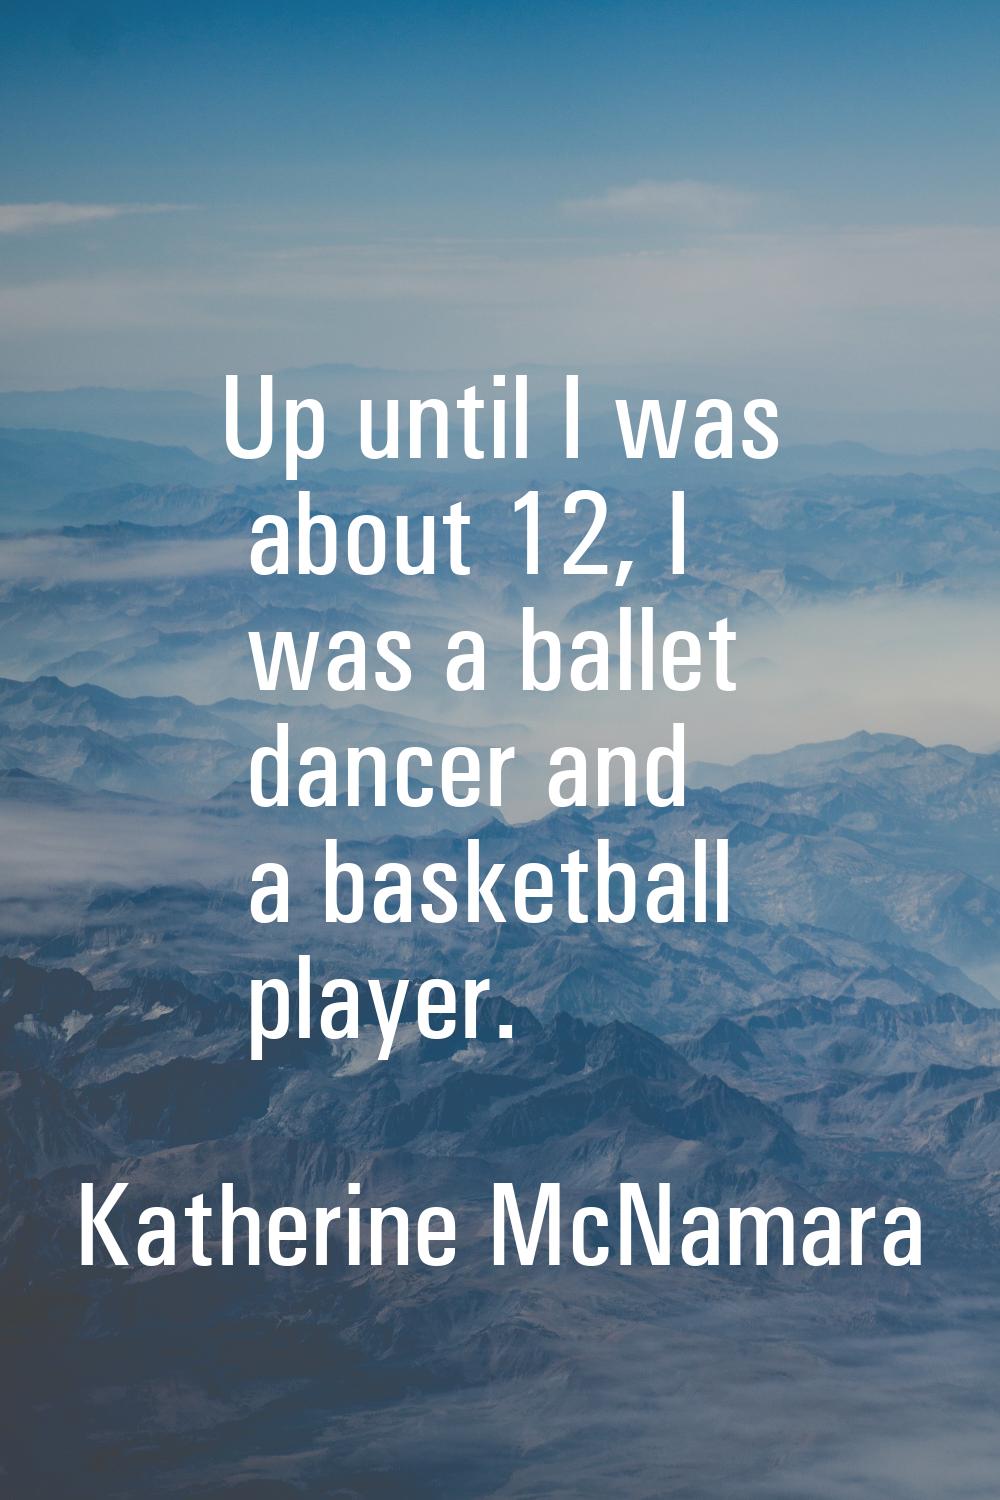 Up until I was about 12, I was a ballet dancer and a basketball player.